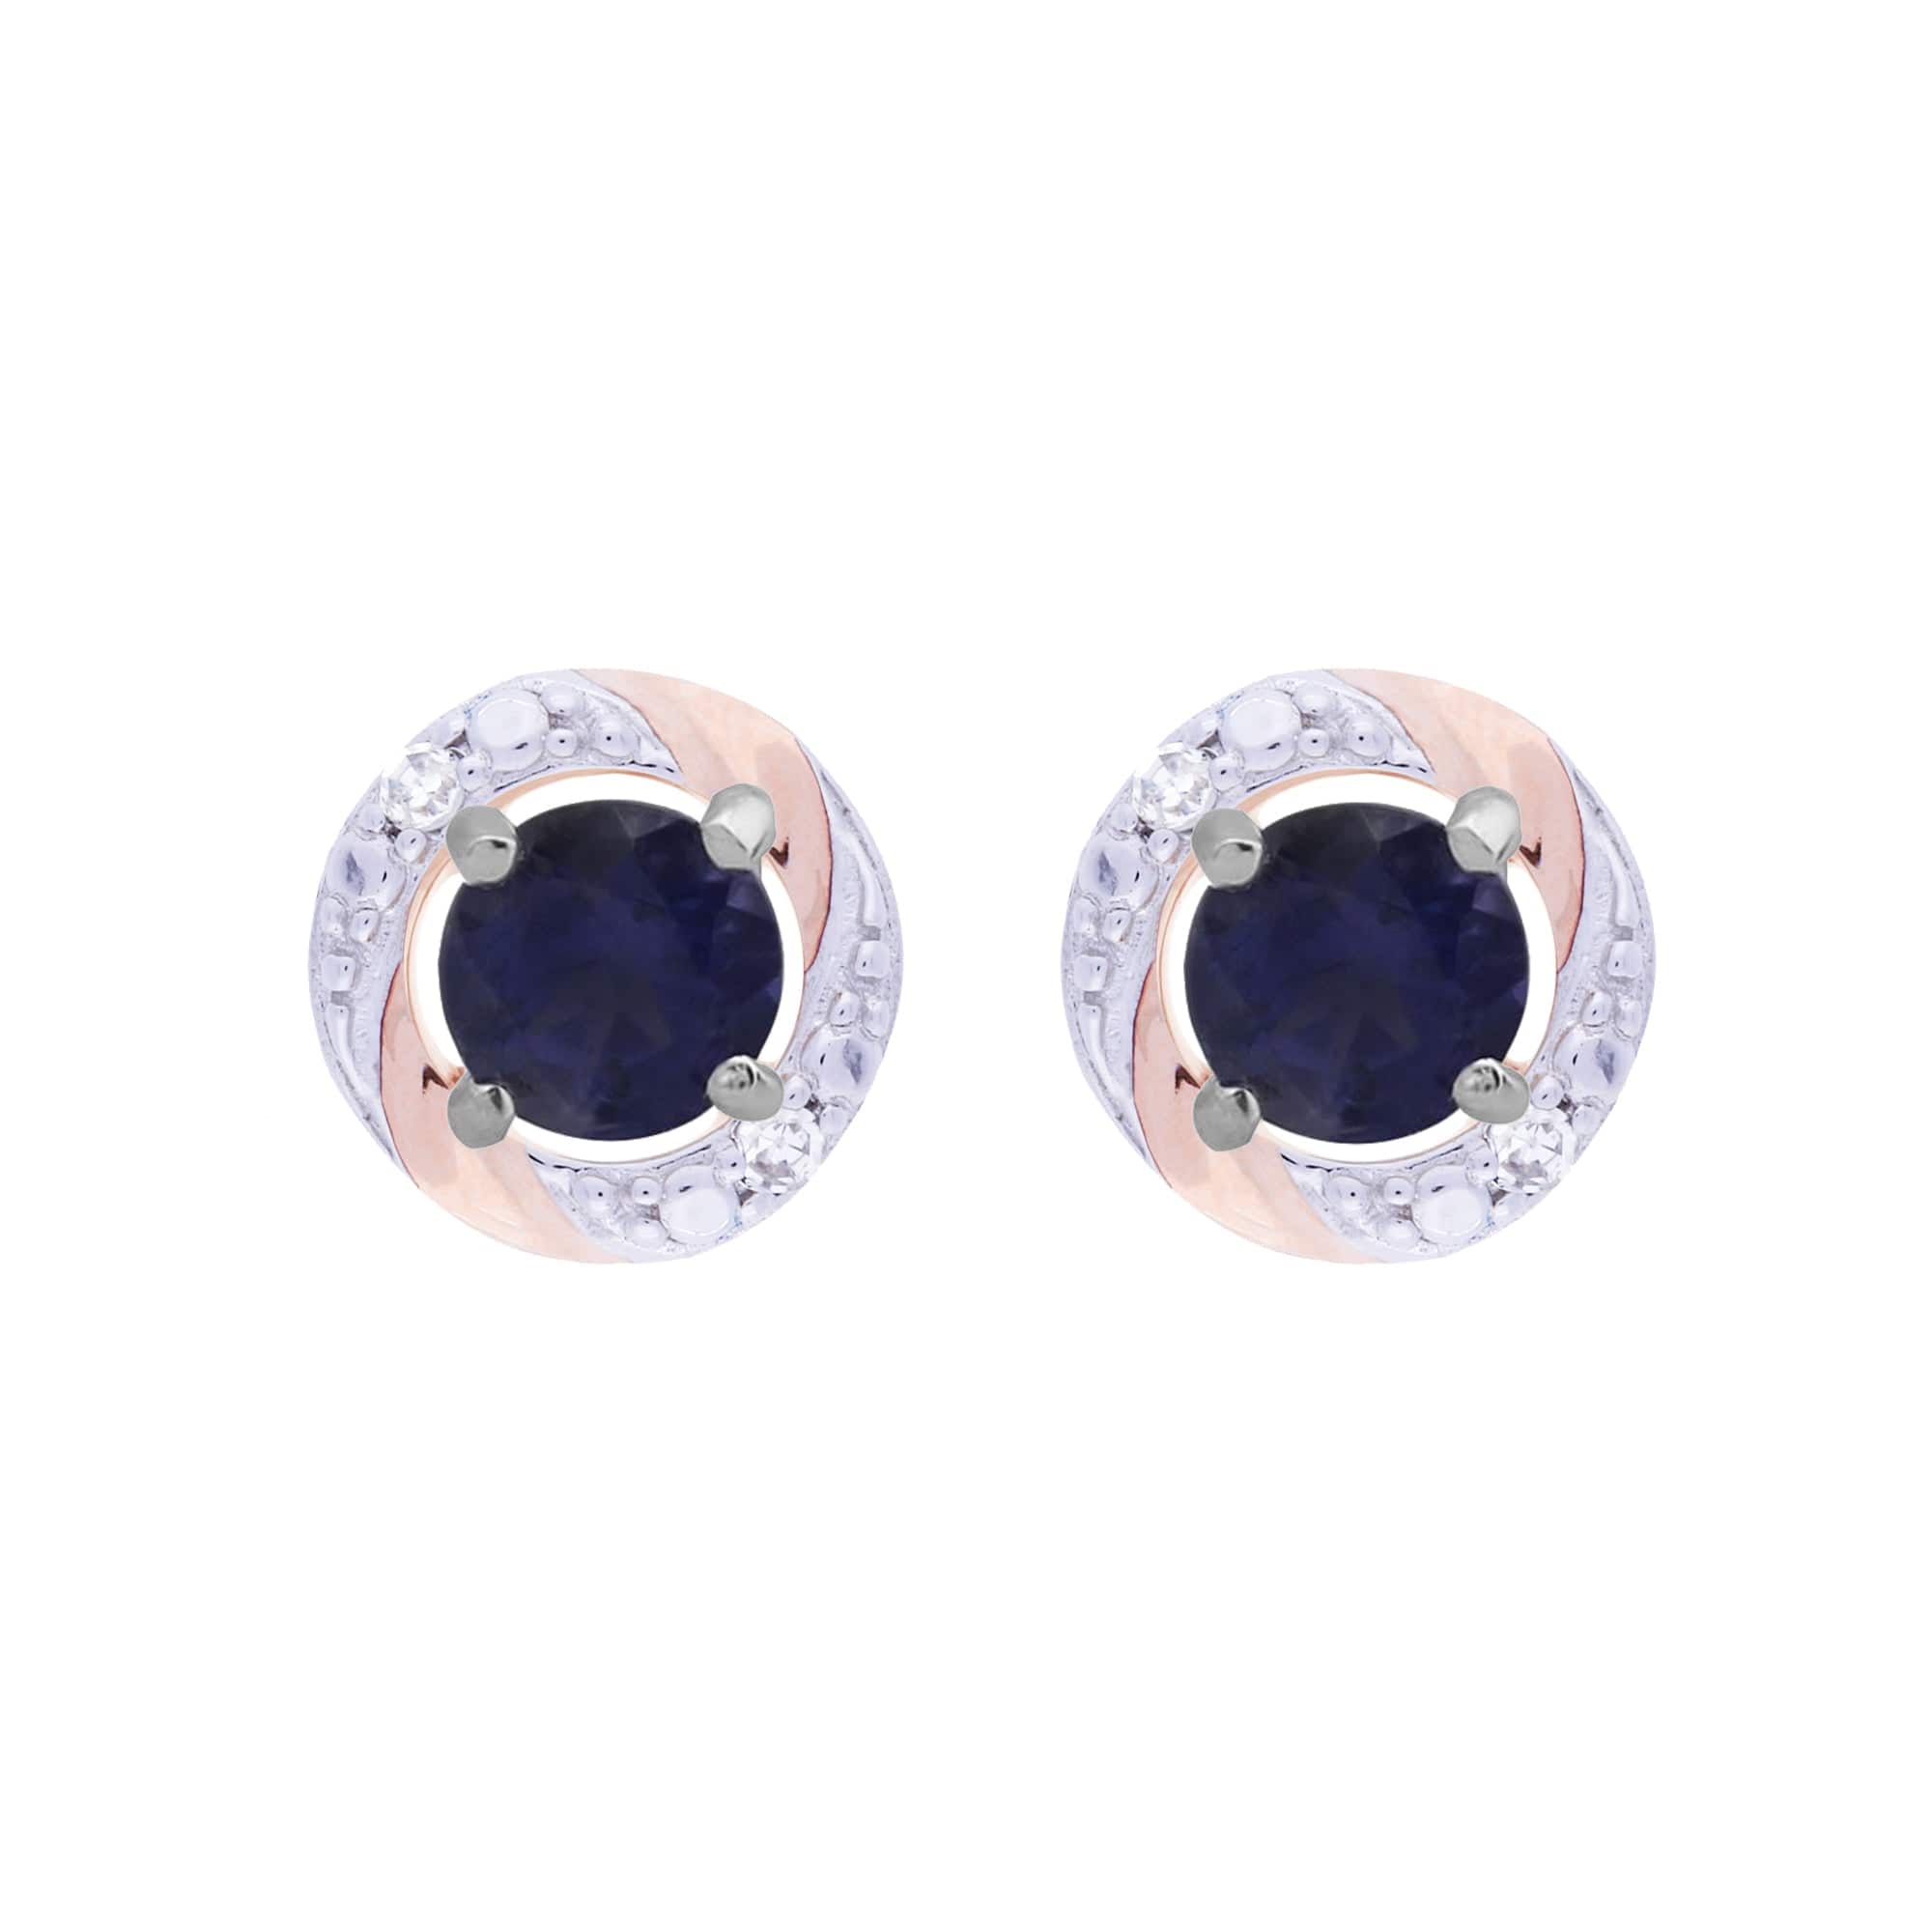 162E0071189-191E0378019 Classic Round Iolite Stud Earrings with Detachable Diamond Round Earrings Jacket Set in 9ct White Gold 1